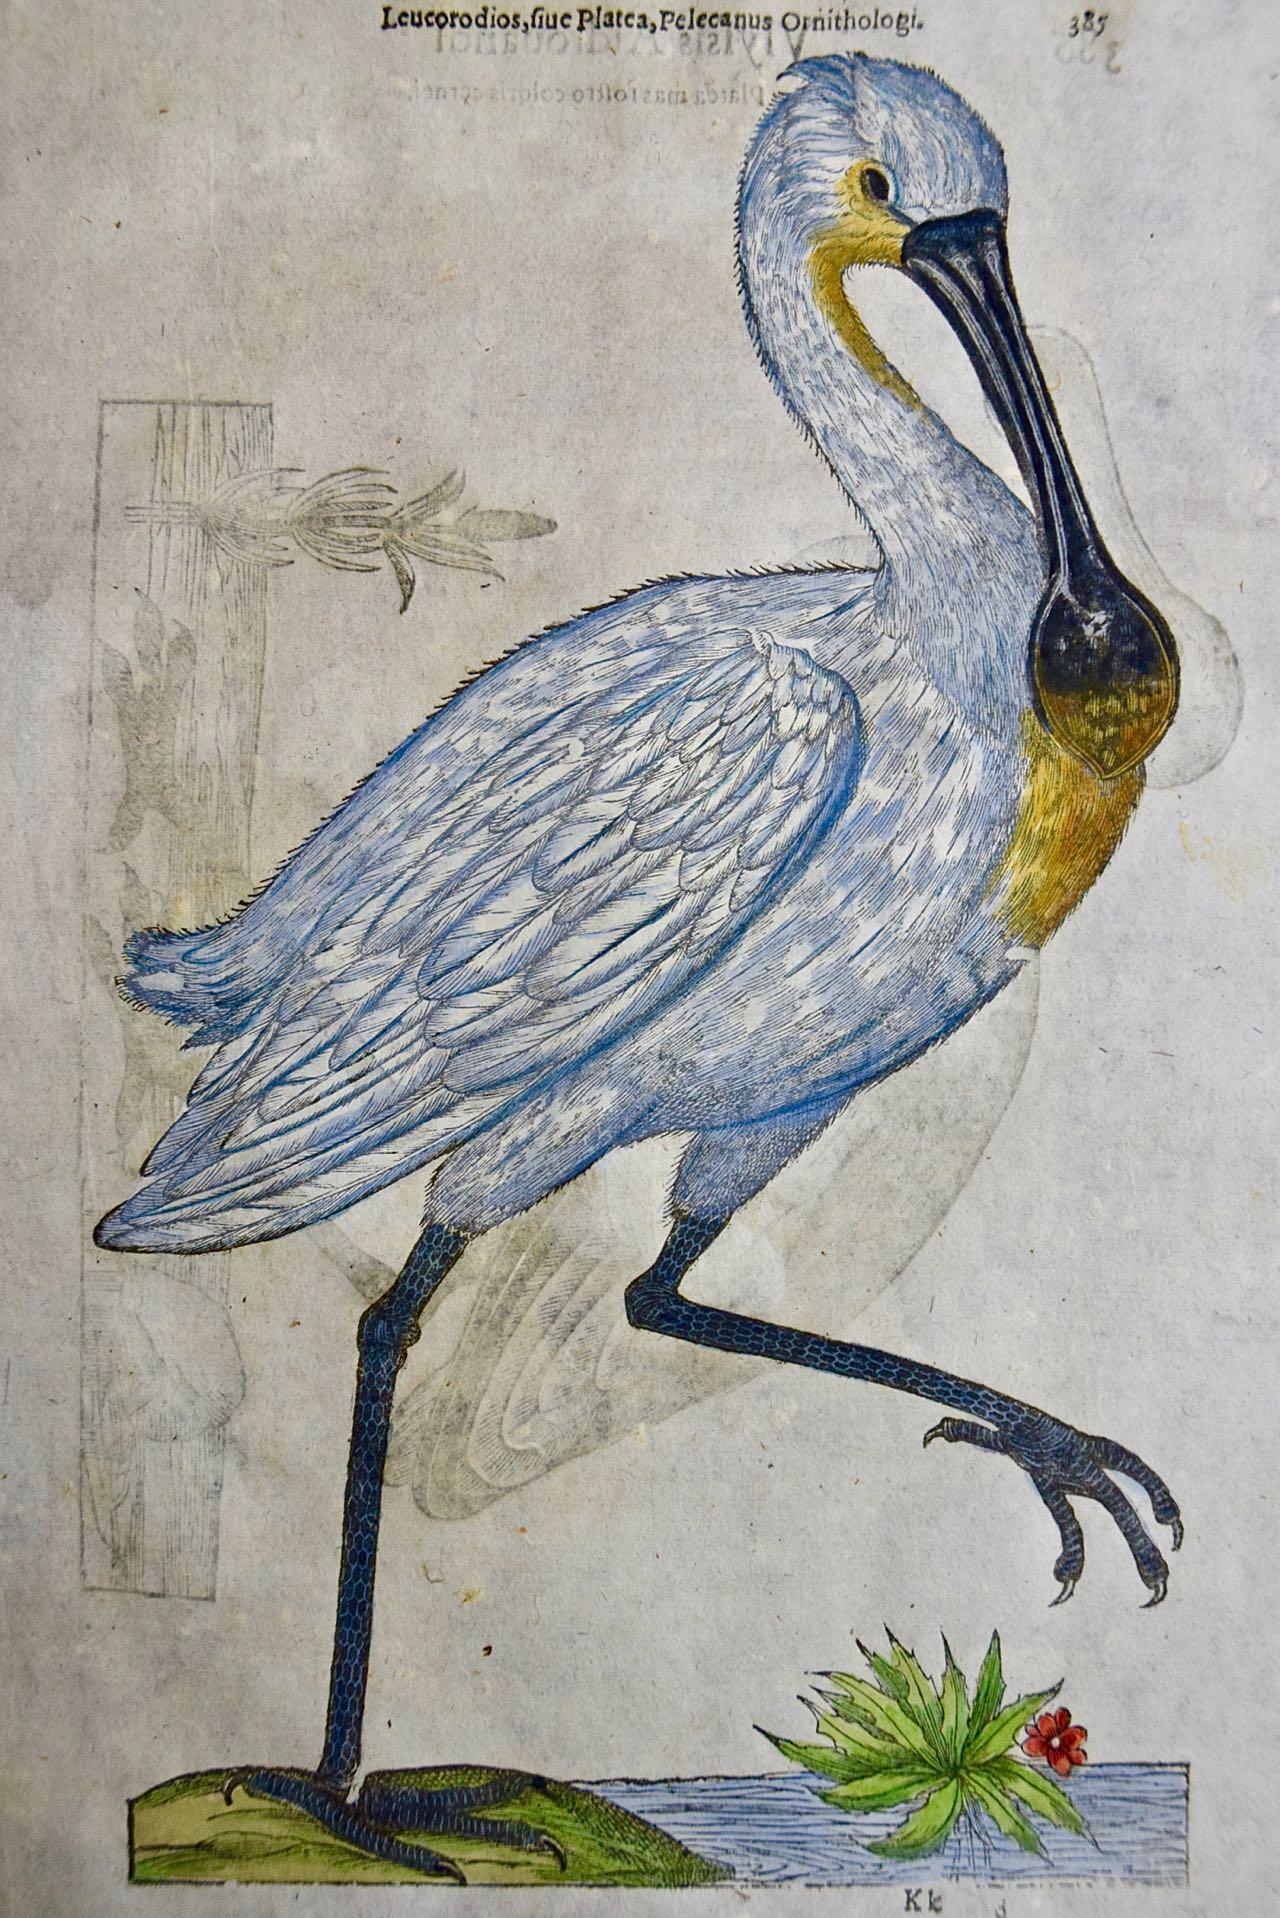 A 16th/17th Century Hand-colored Engraving of a Spoonbill Bird by Aldrovandi - Print by Ulisse Aldrovandi